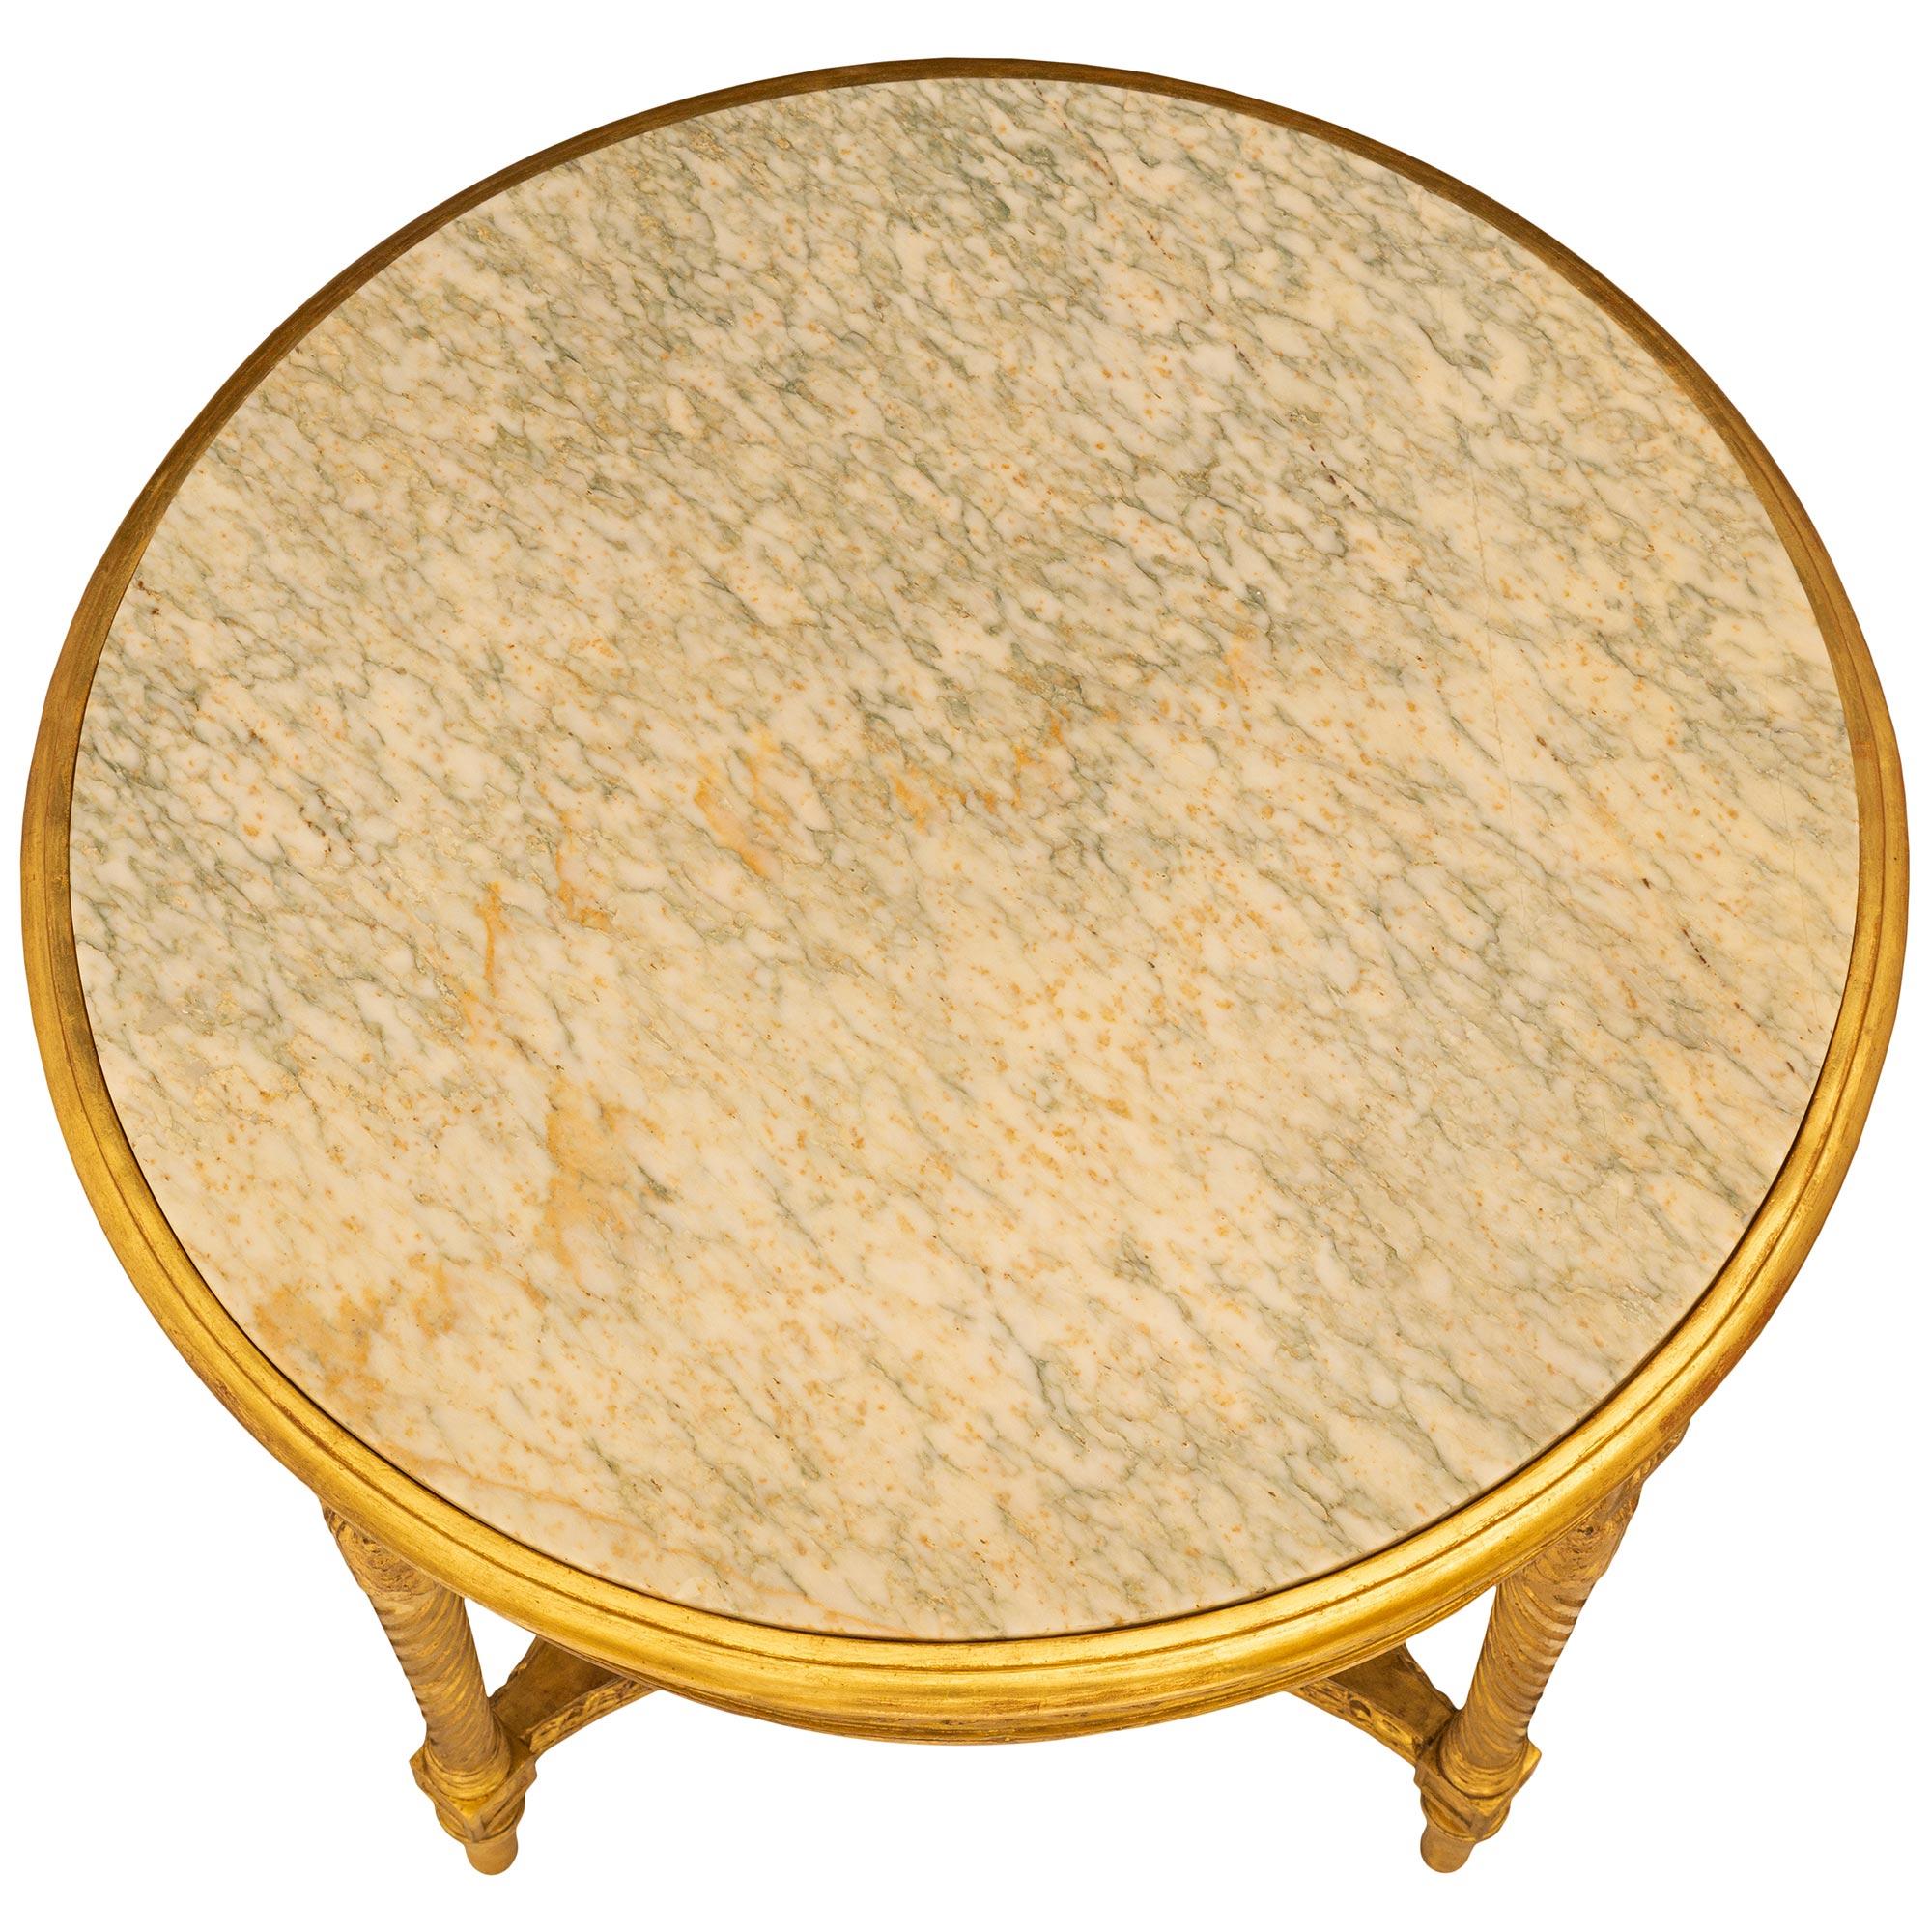 An exquisitely decorated French 19th century Louis XVI st. Giltwood side table. This elegant and highly detailed circular table is supported by four tapered circular feet with a top band. The four legs are joined by a bottom stretcher with a woven